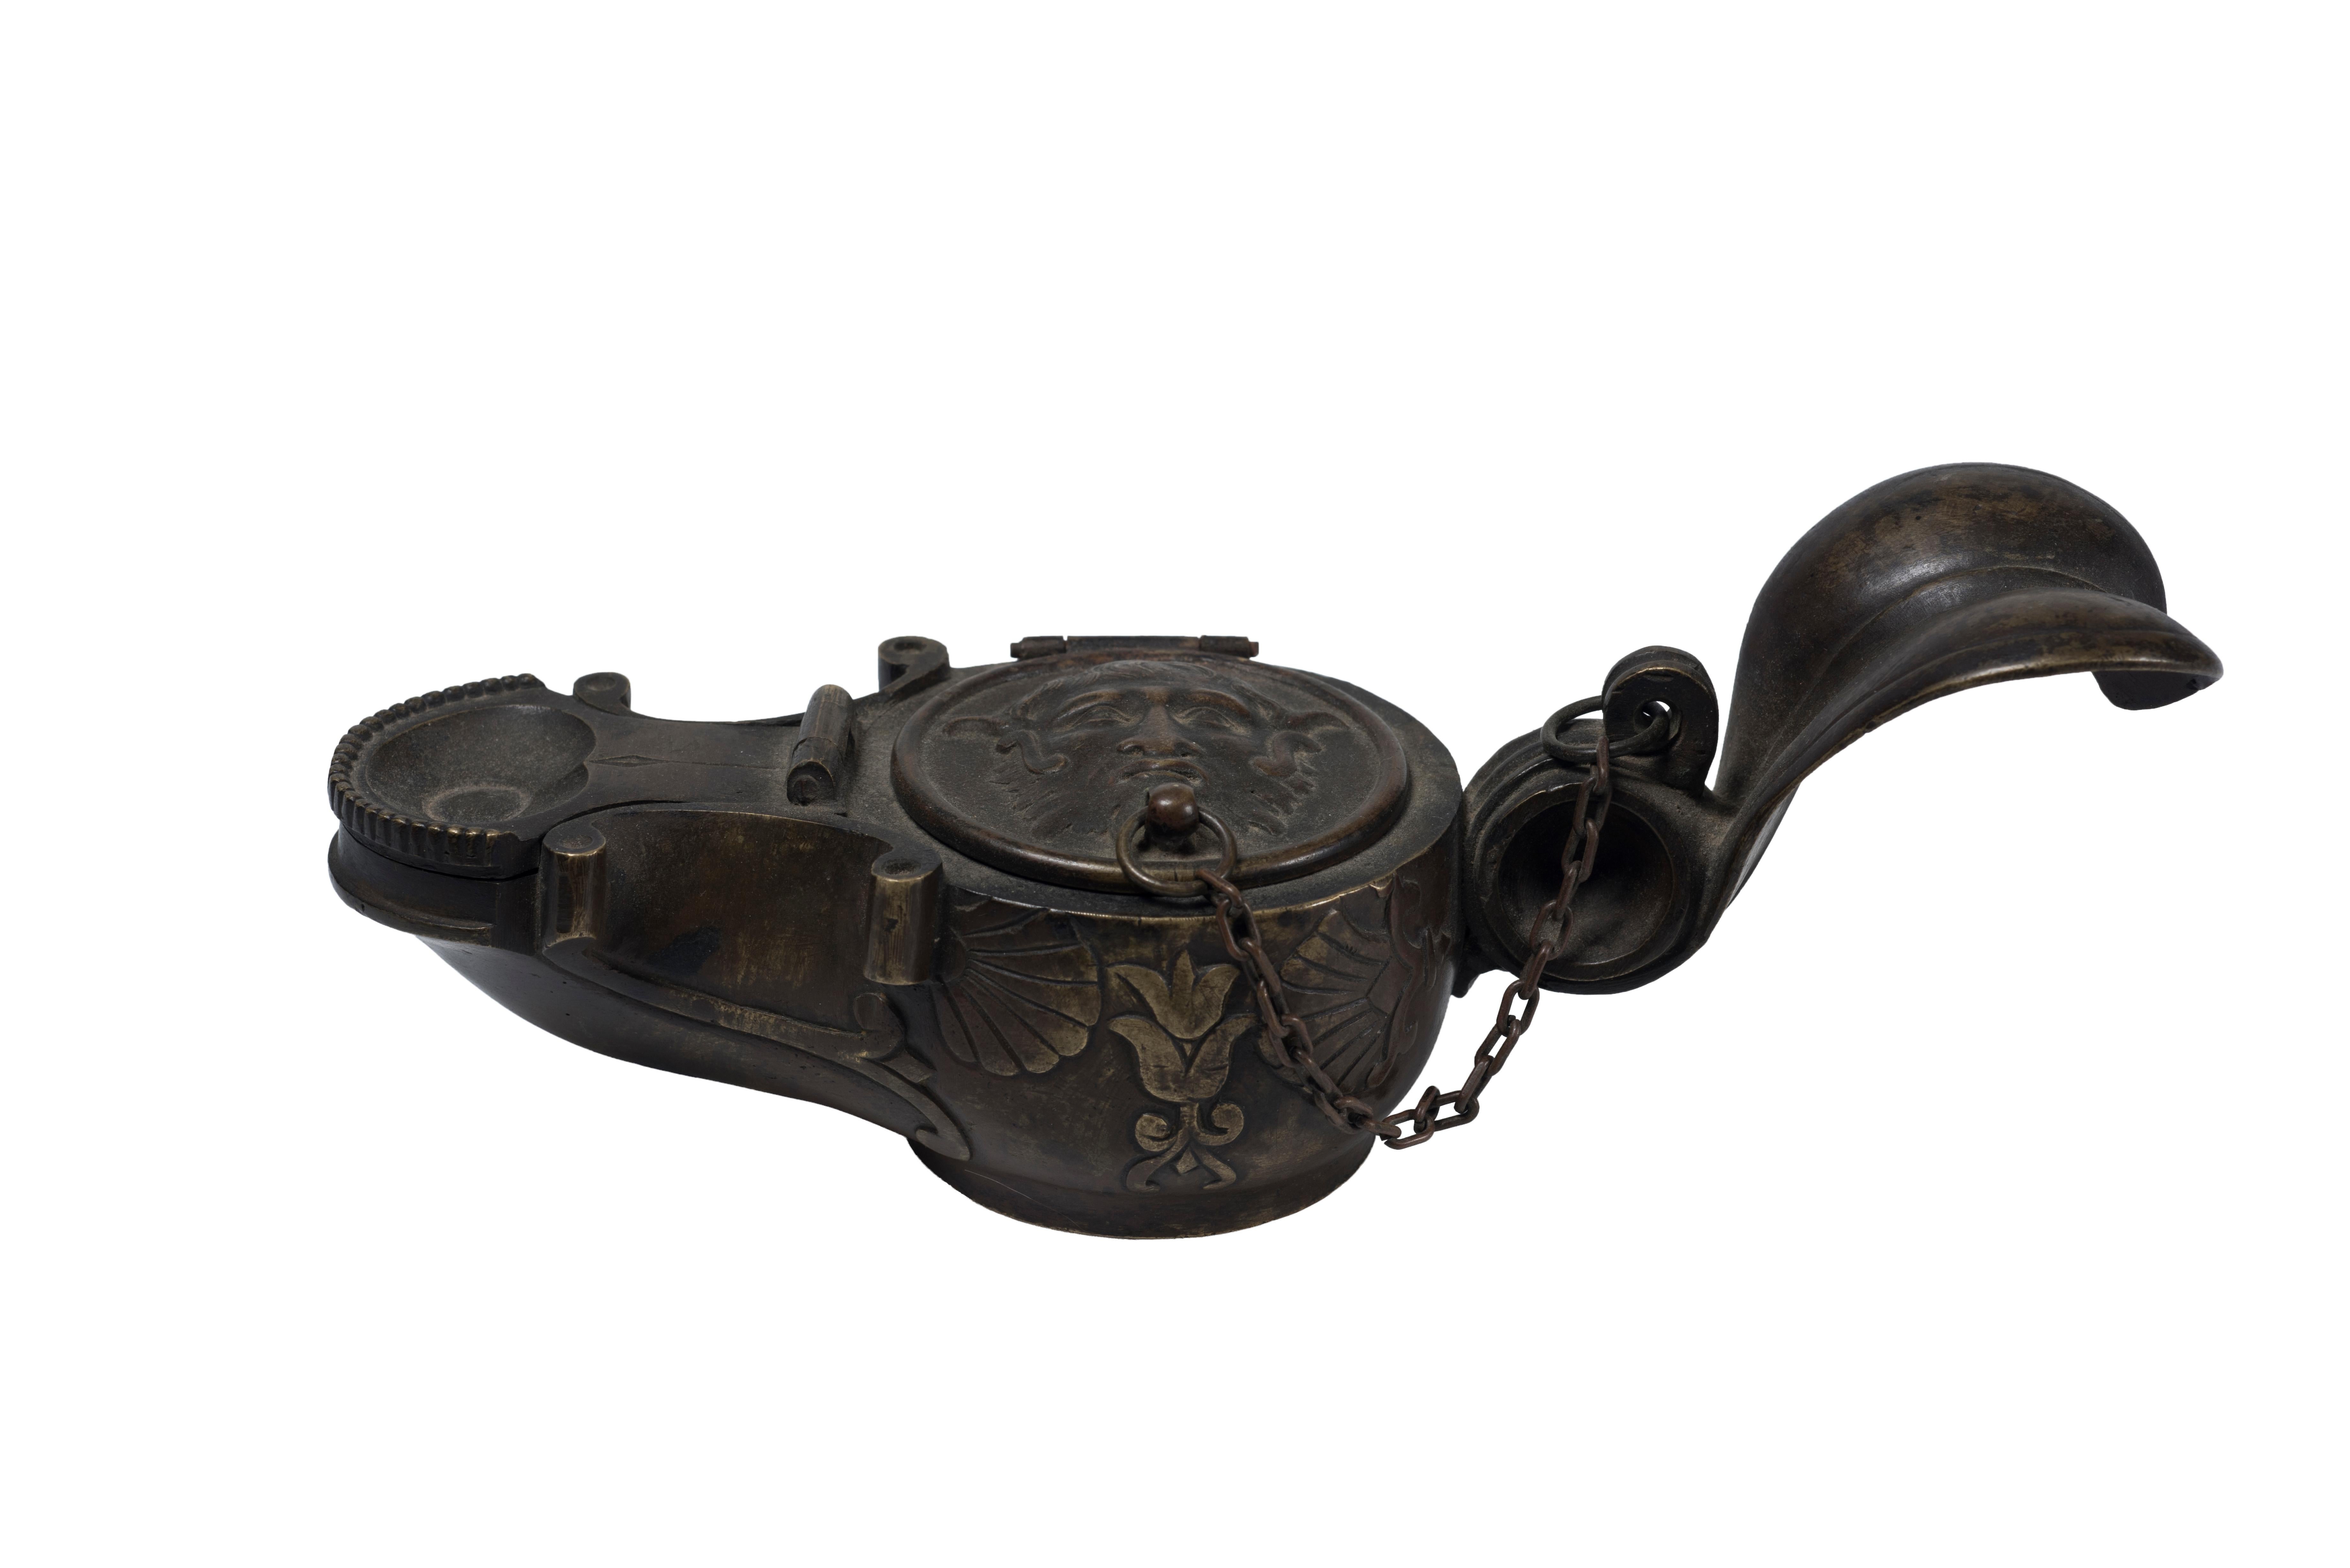 Oil Lamp is an original decorative object realized in Rome at the beginning of 1800.

After G. Winckelmann’s Lamp (found in Pompeii).

This elegant lamp was used as a bronze inkwell.

Very good conditions.

This object is shipped from Italy.